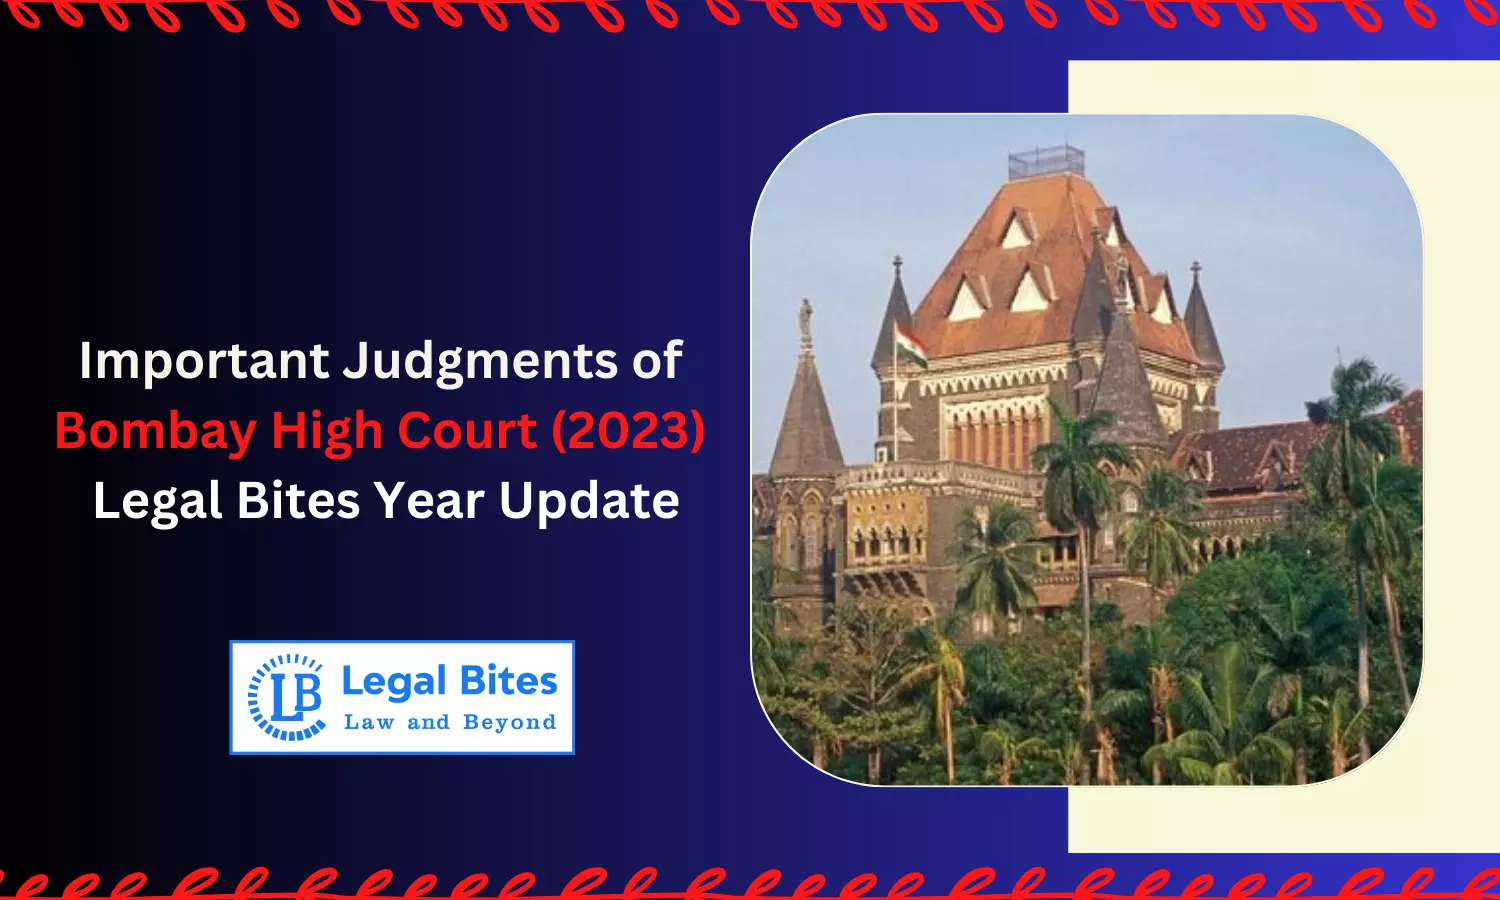 Important Judgments of Bombay High Court (2023) - Legal Bites Year Update